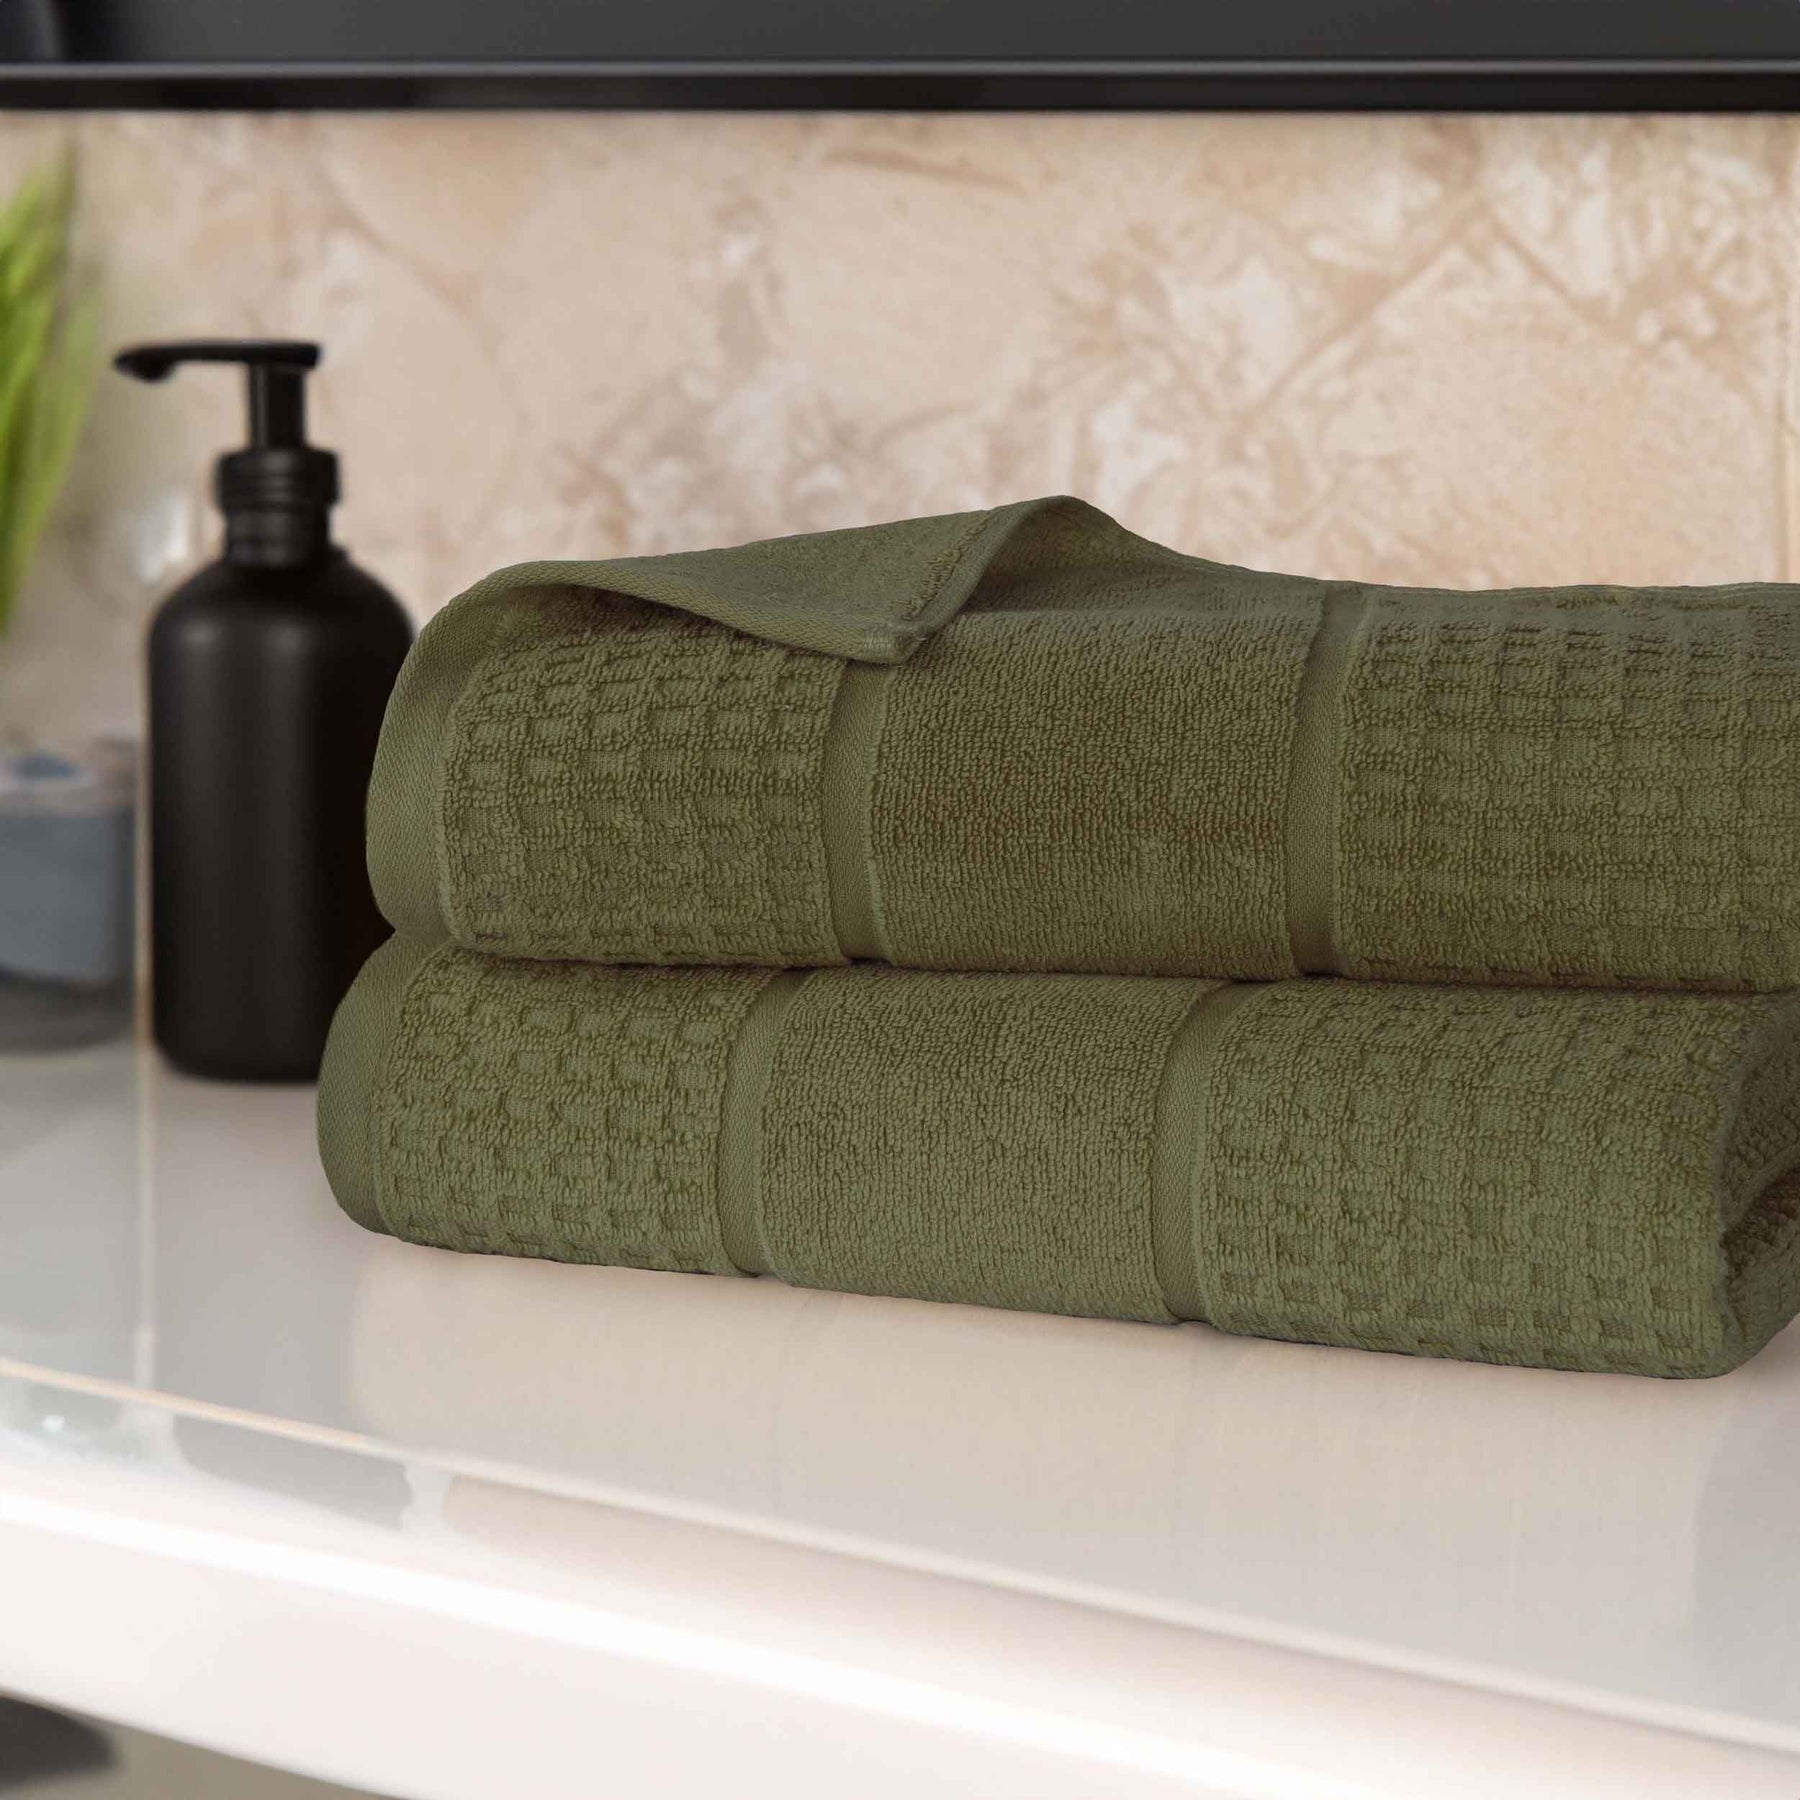 BATH TOWELS Cotton Linen Large Green and Brown Organic Soft Waffle